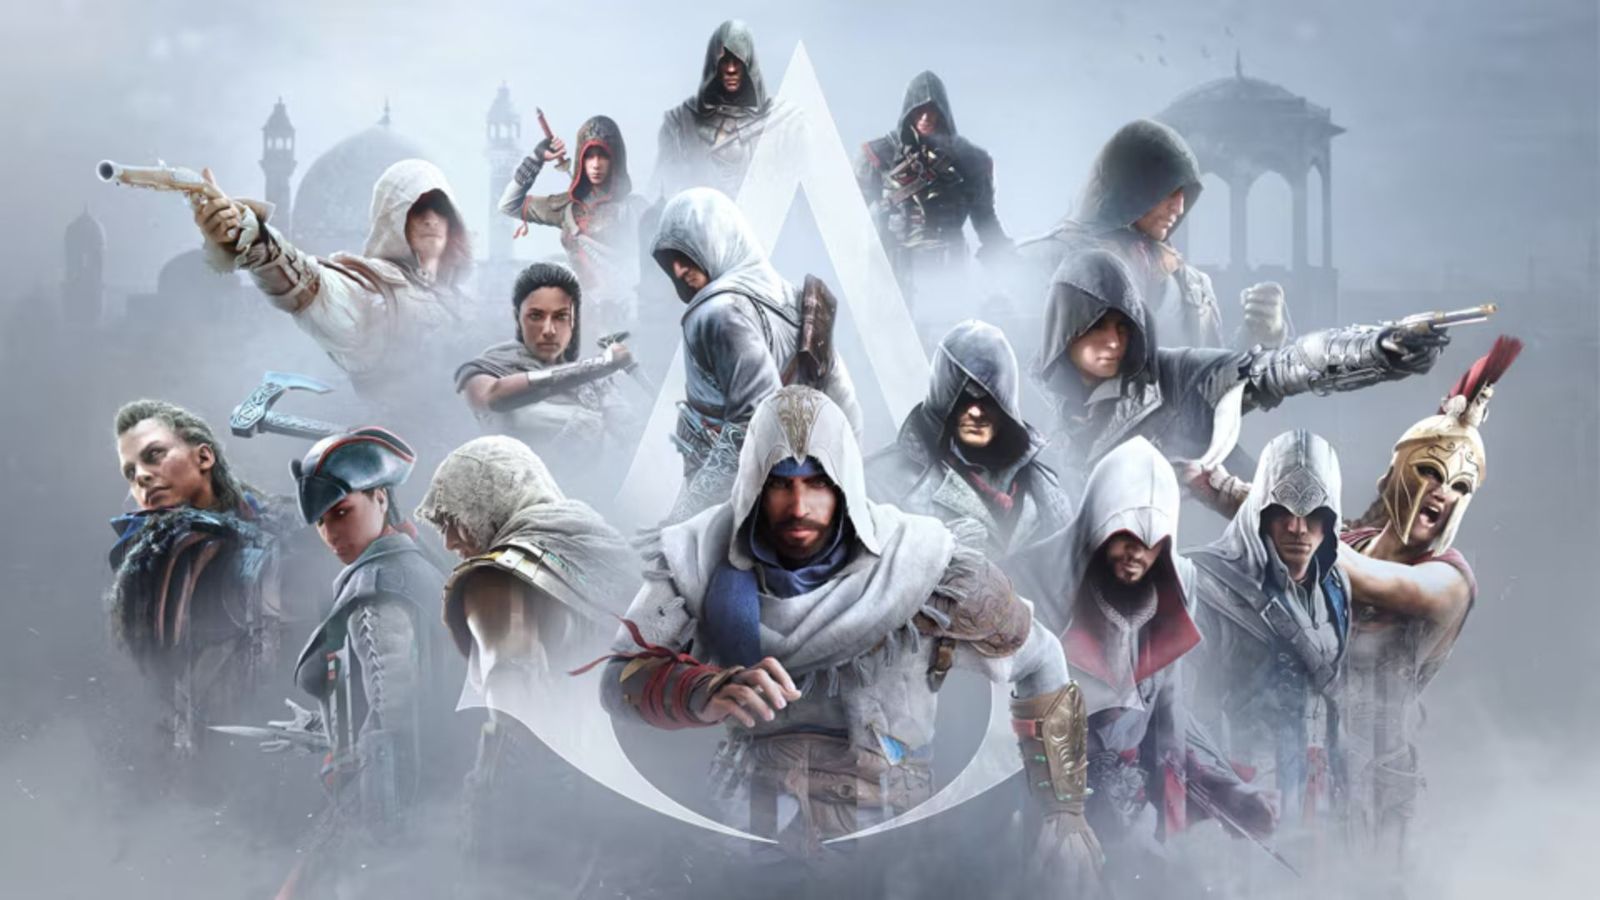 All of the protagonists in Assassin's Creed